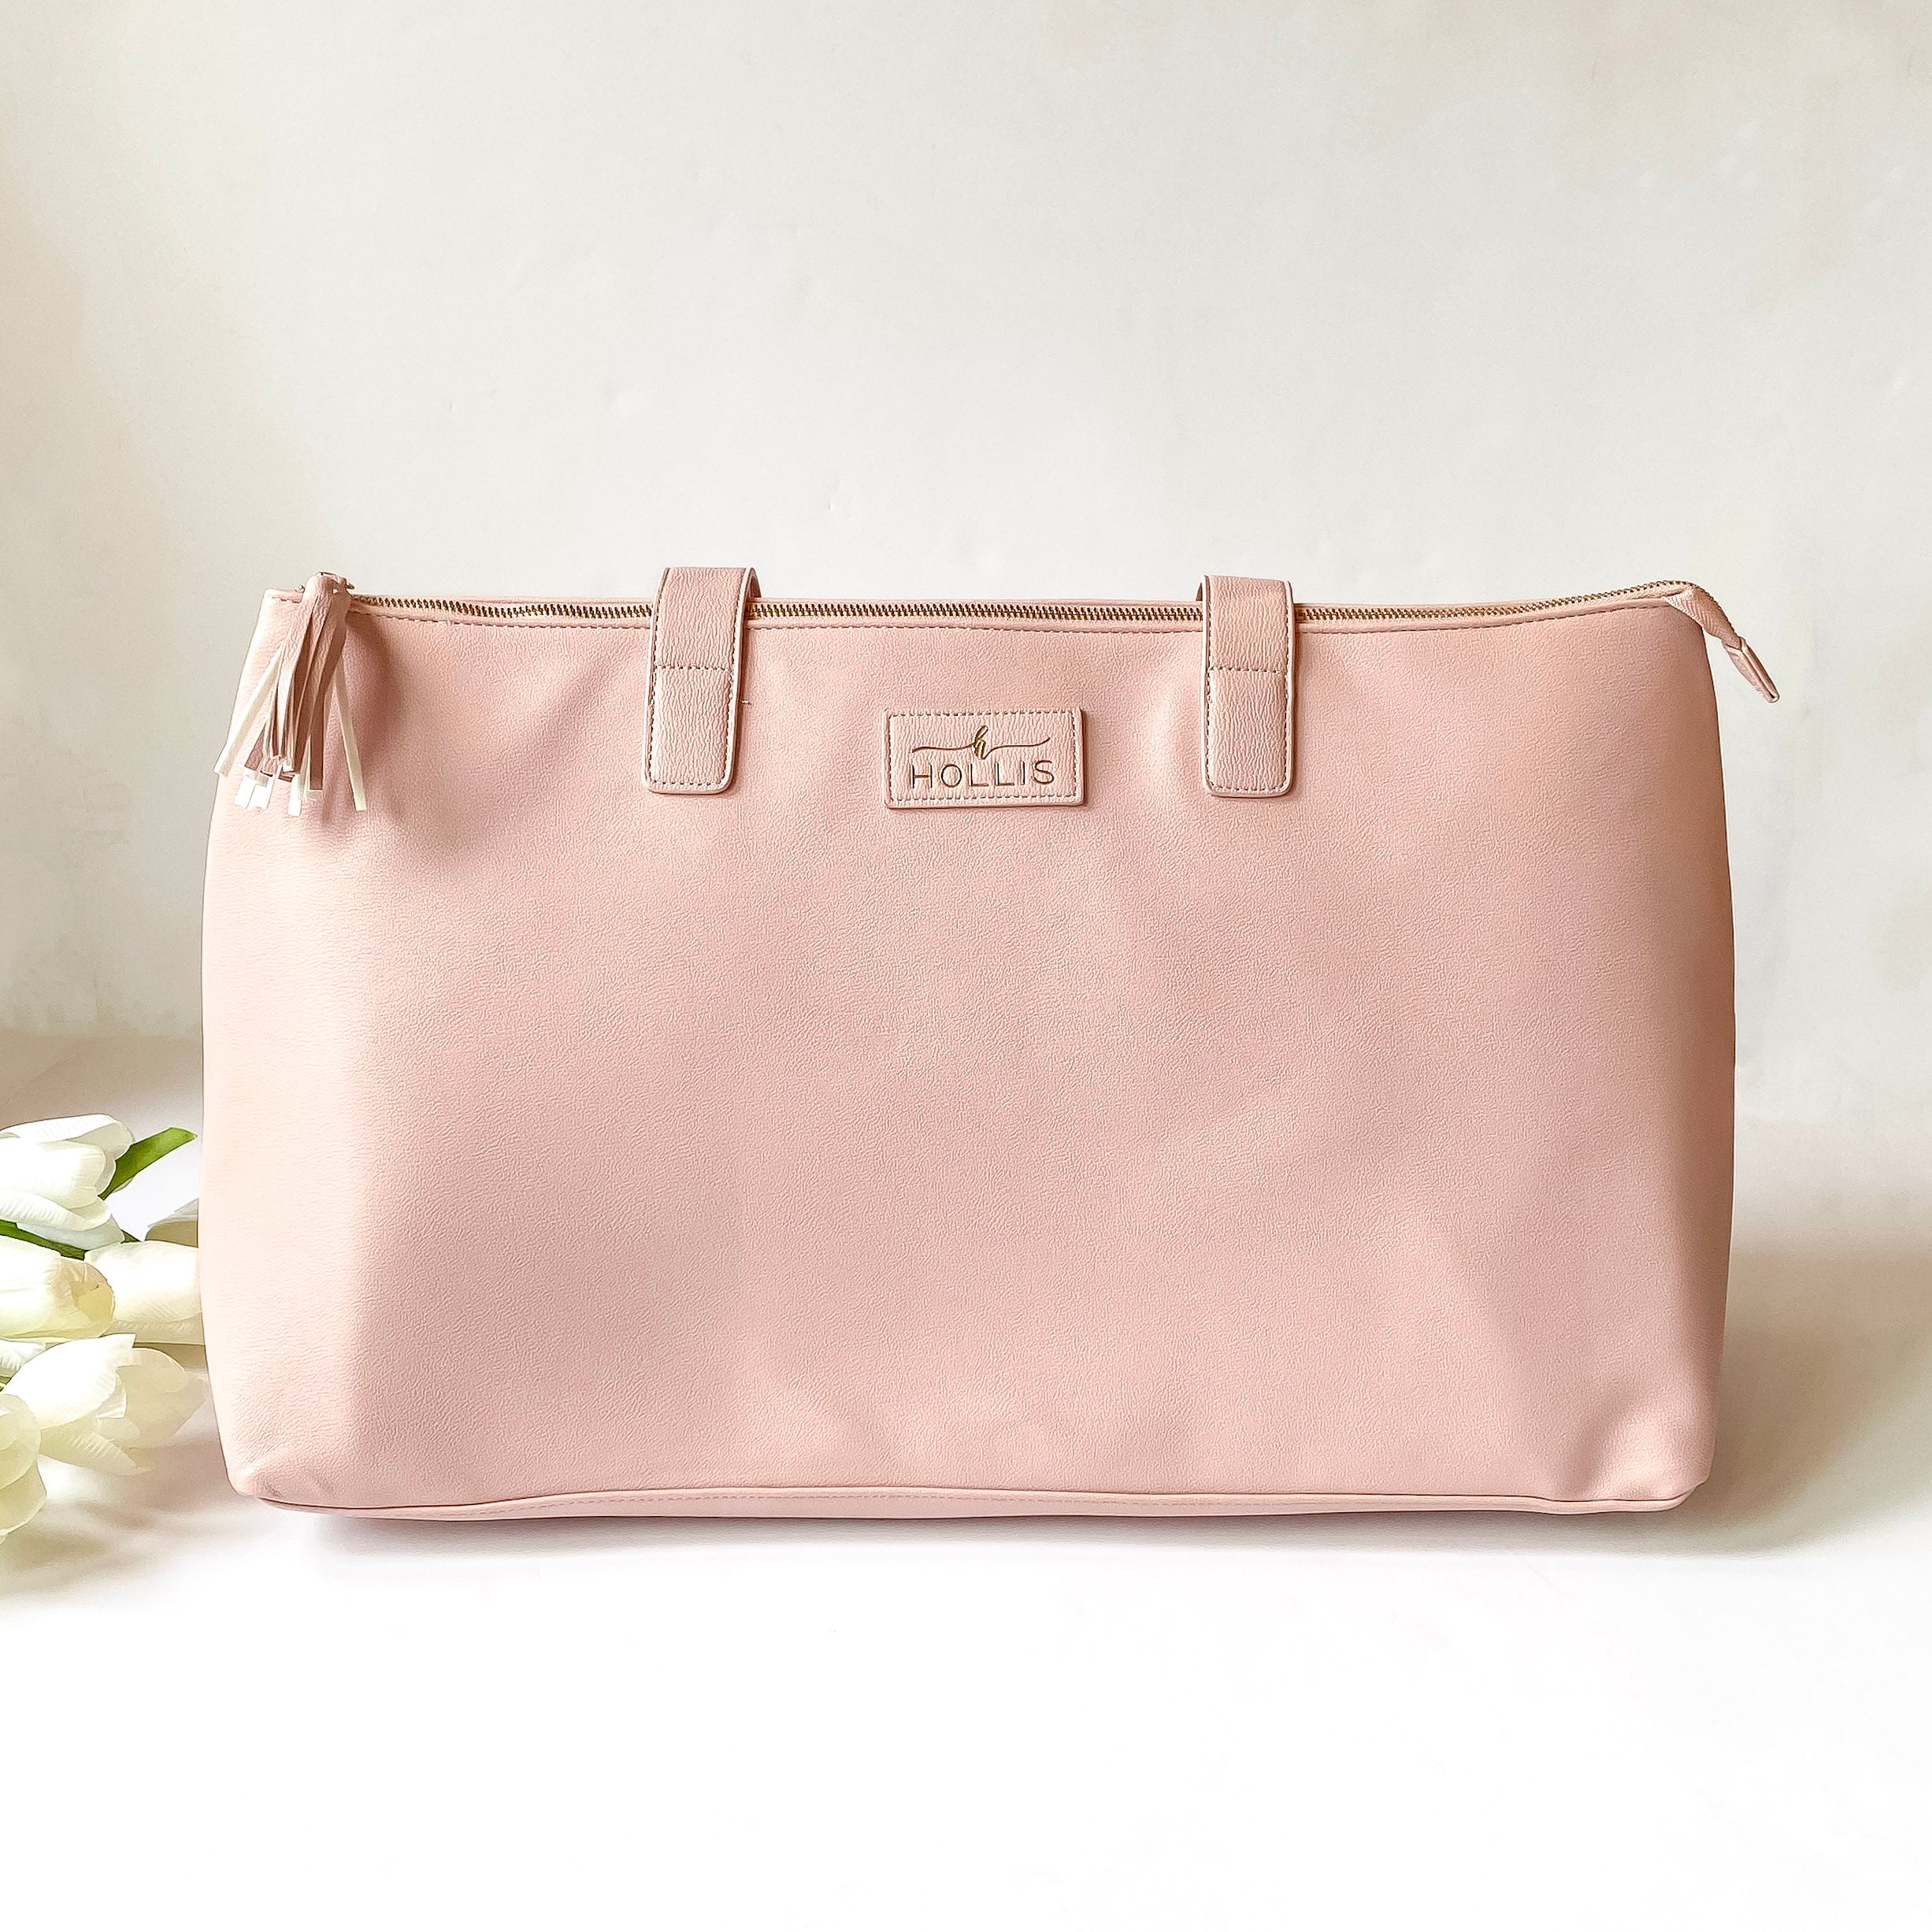 Blush pink duffle bag with a top zipper and blush pink handles. This bag is pictured on a white background with white flowers on the left side of the bag.